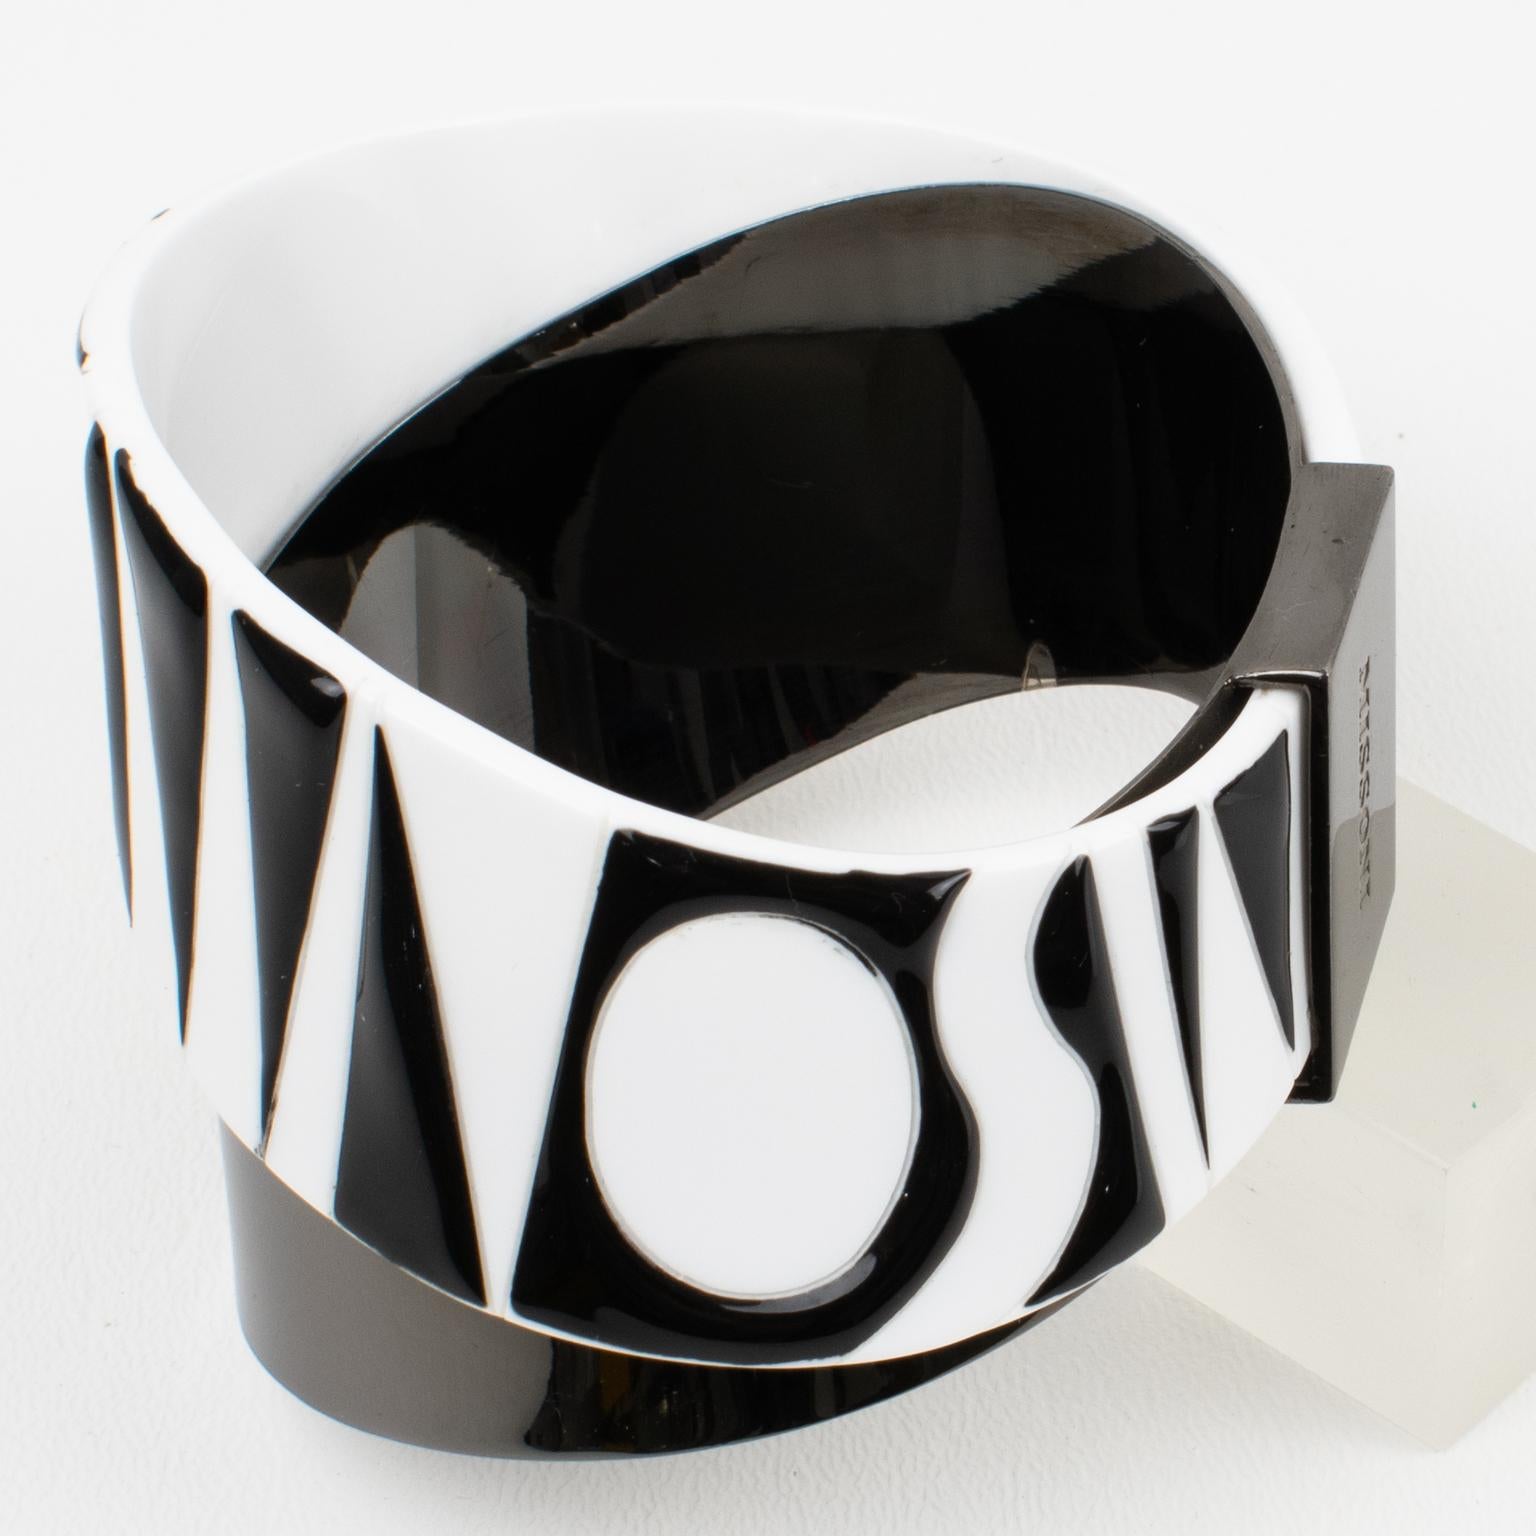 Women's or Men's Missoni Black and White Lucite and Metal Bracelet Bangle, Runway Spring 2014 For Sale